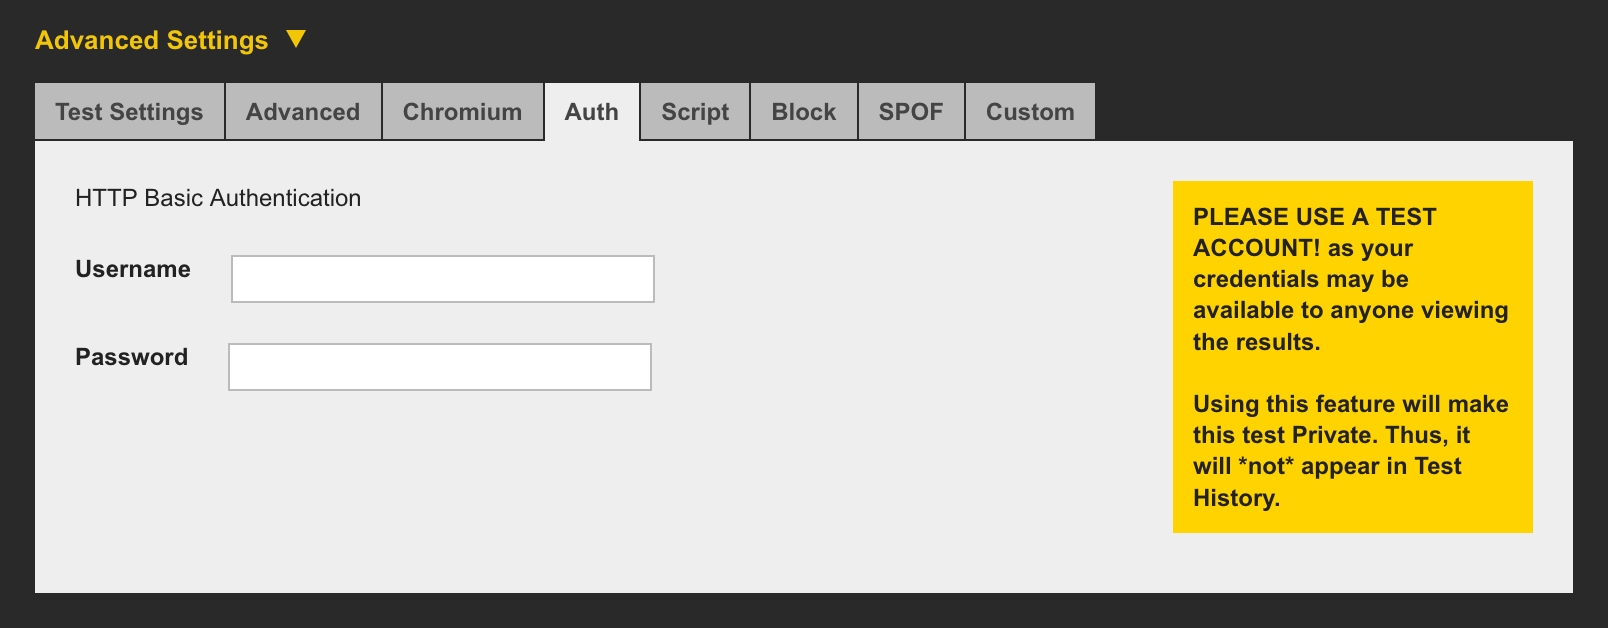 Allow WPT to access a website behind HTTP authentication. Image shows input fields for a username and password.